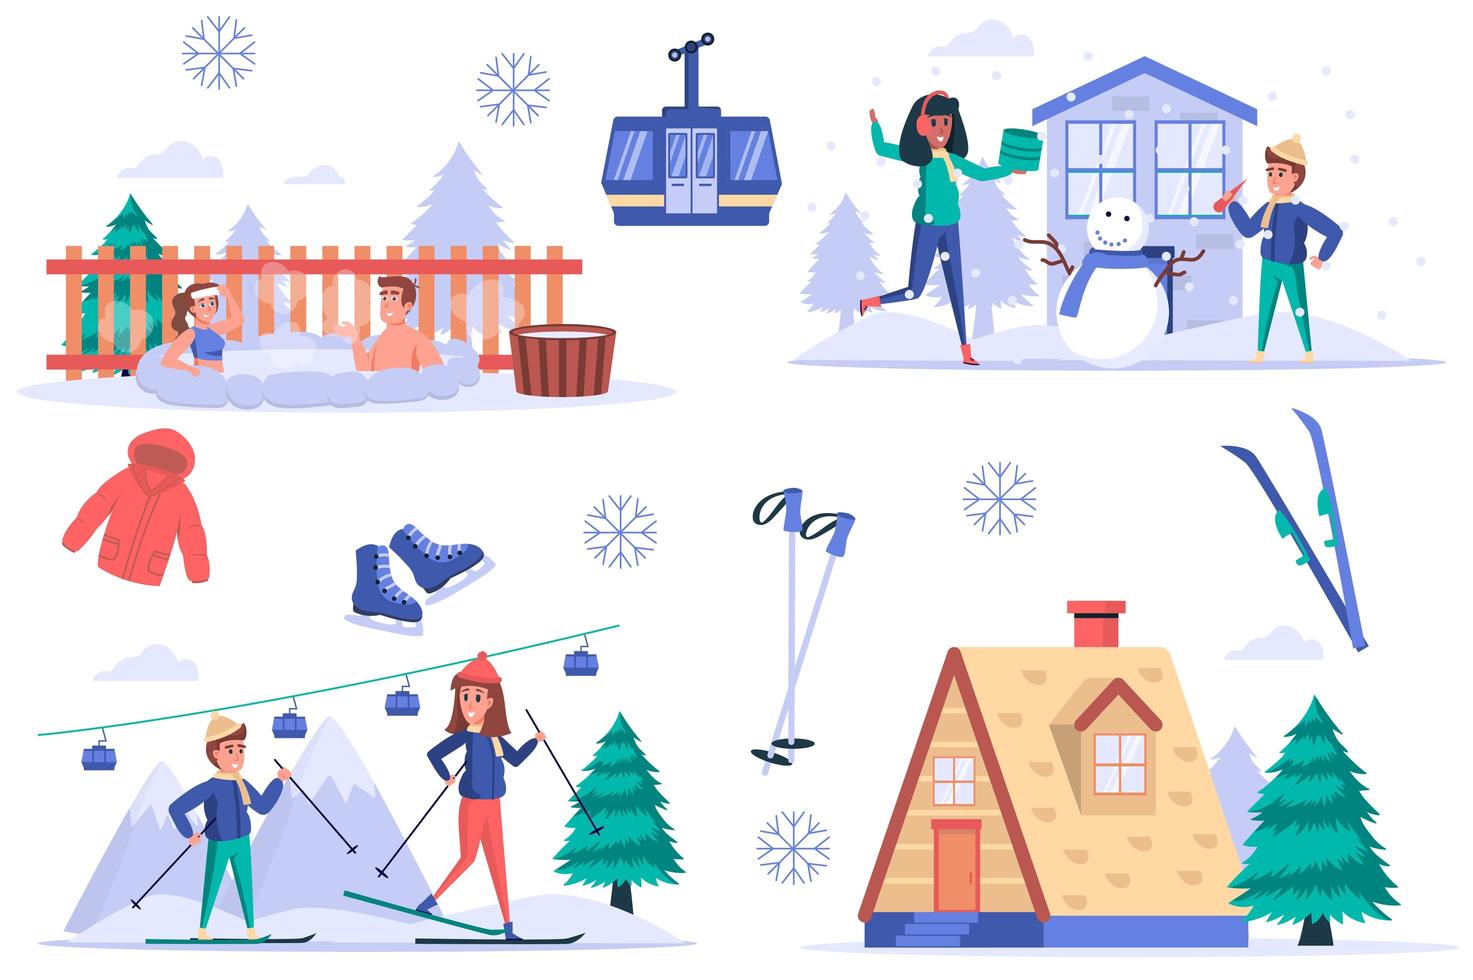 Ski resort isolated elements set. Bundle of people rest in mountains in winter, swim in hot bathtub, make snowman, go skiing and funicular. Creator kit for vector illustration in flat cartoon design